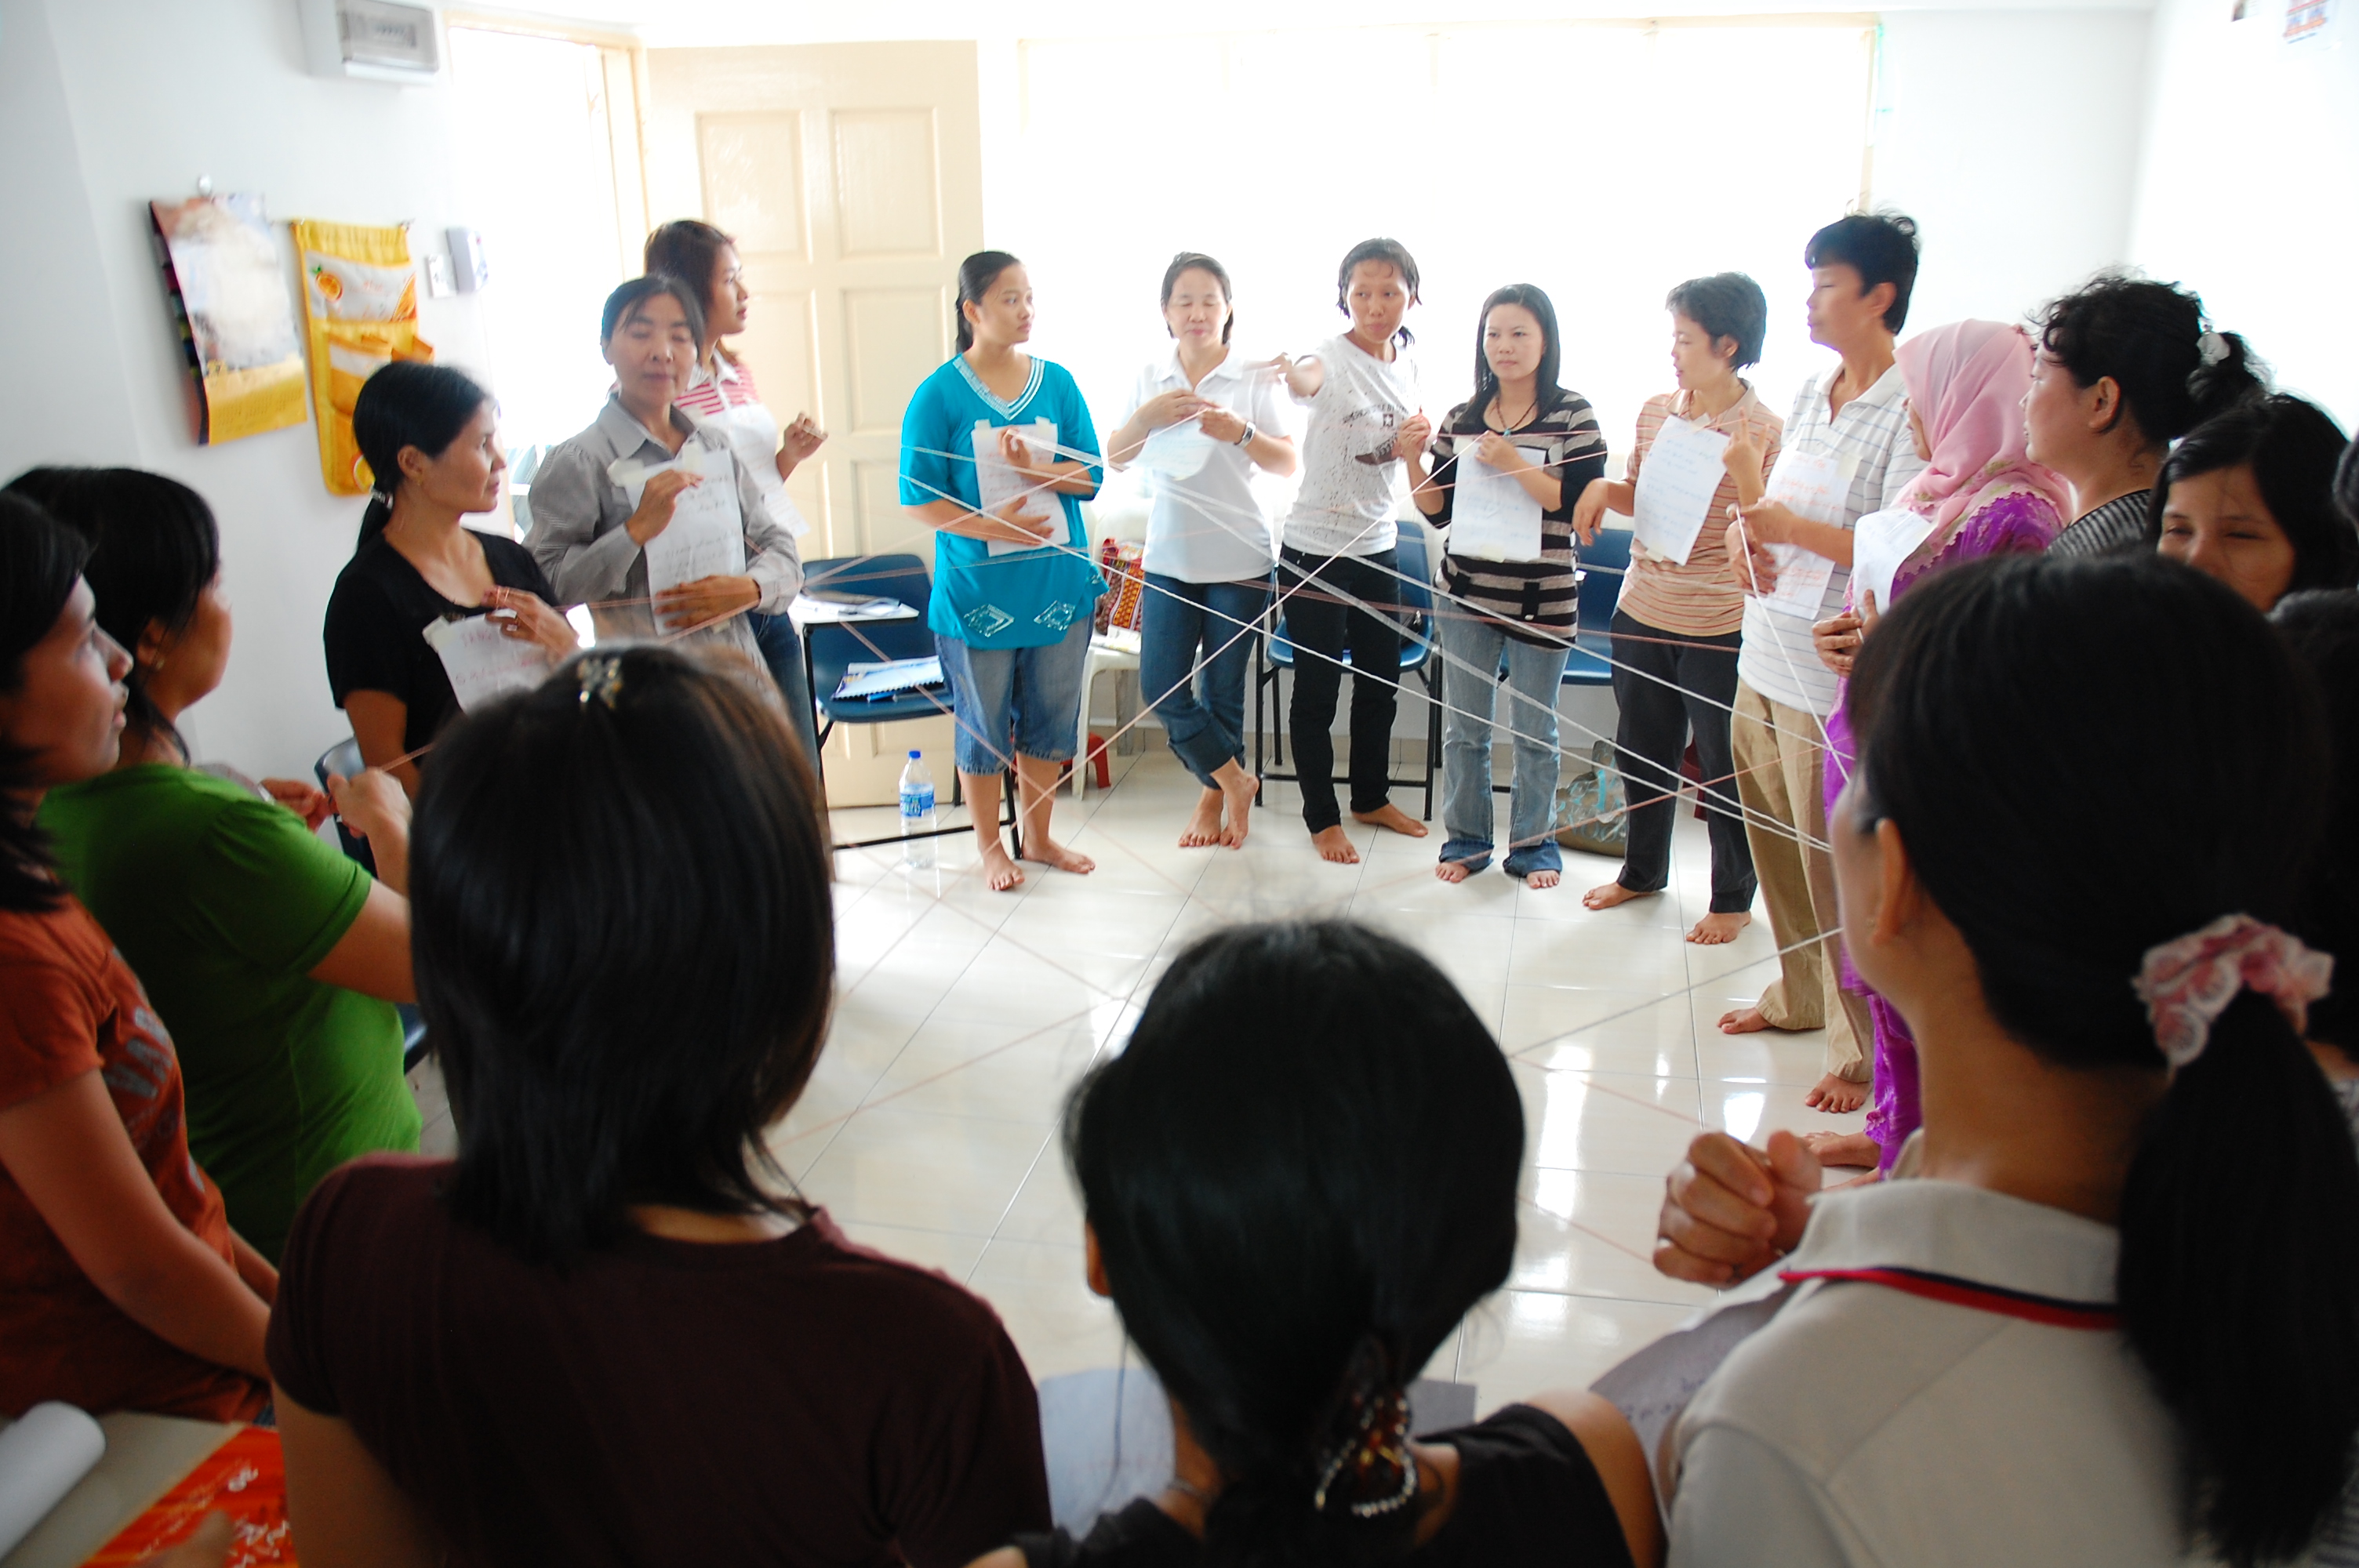 A session with Burmese Refugee women